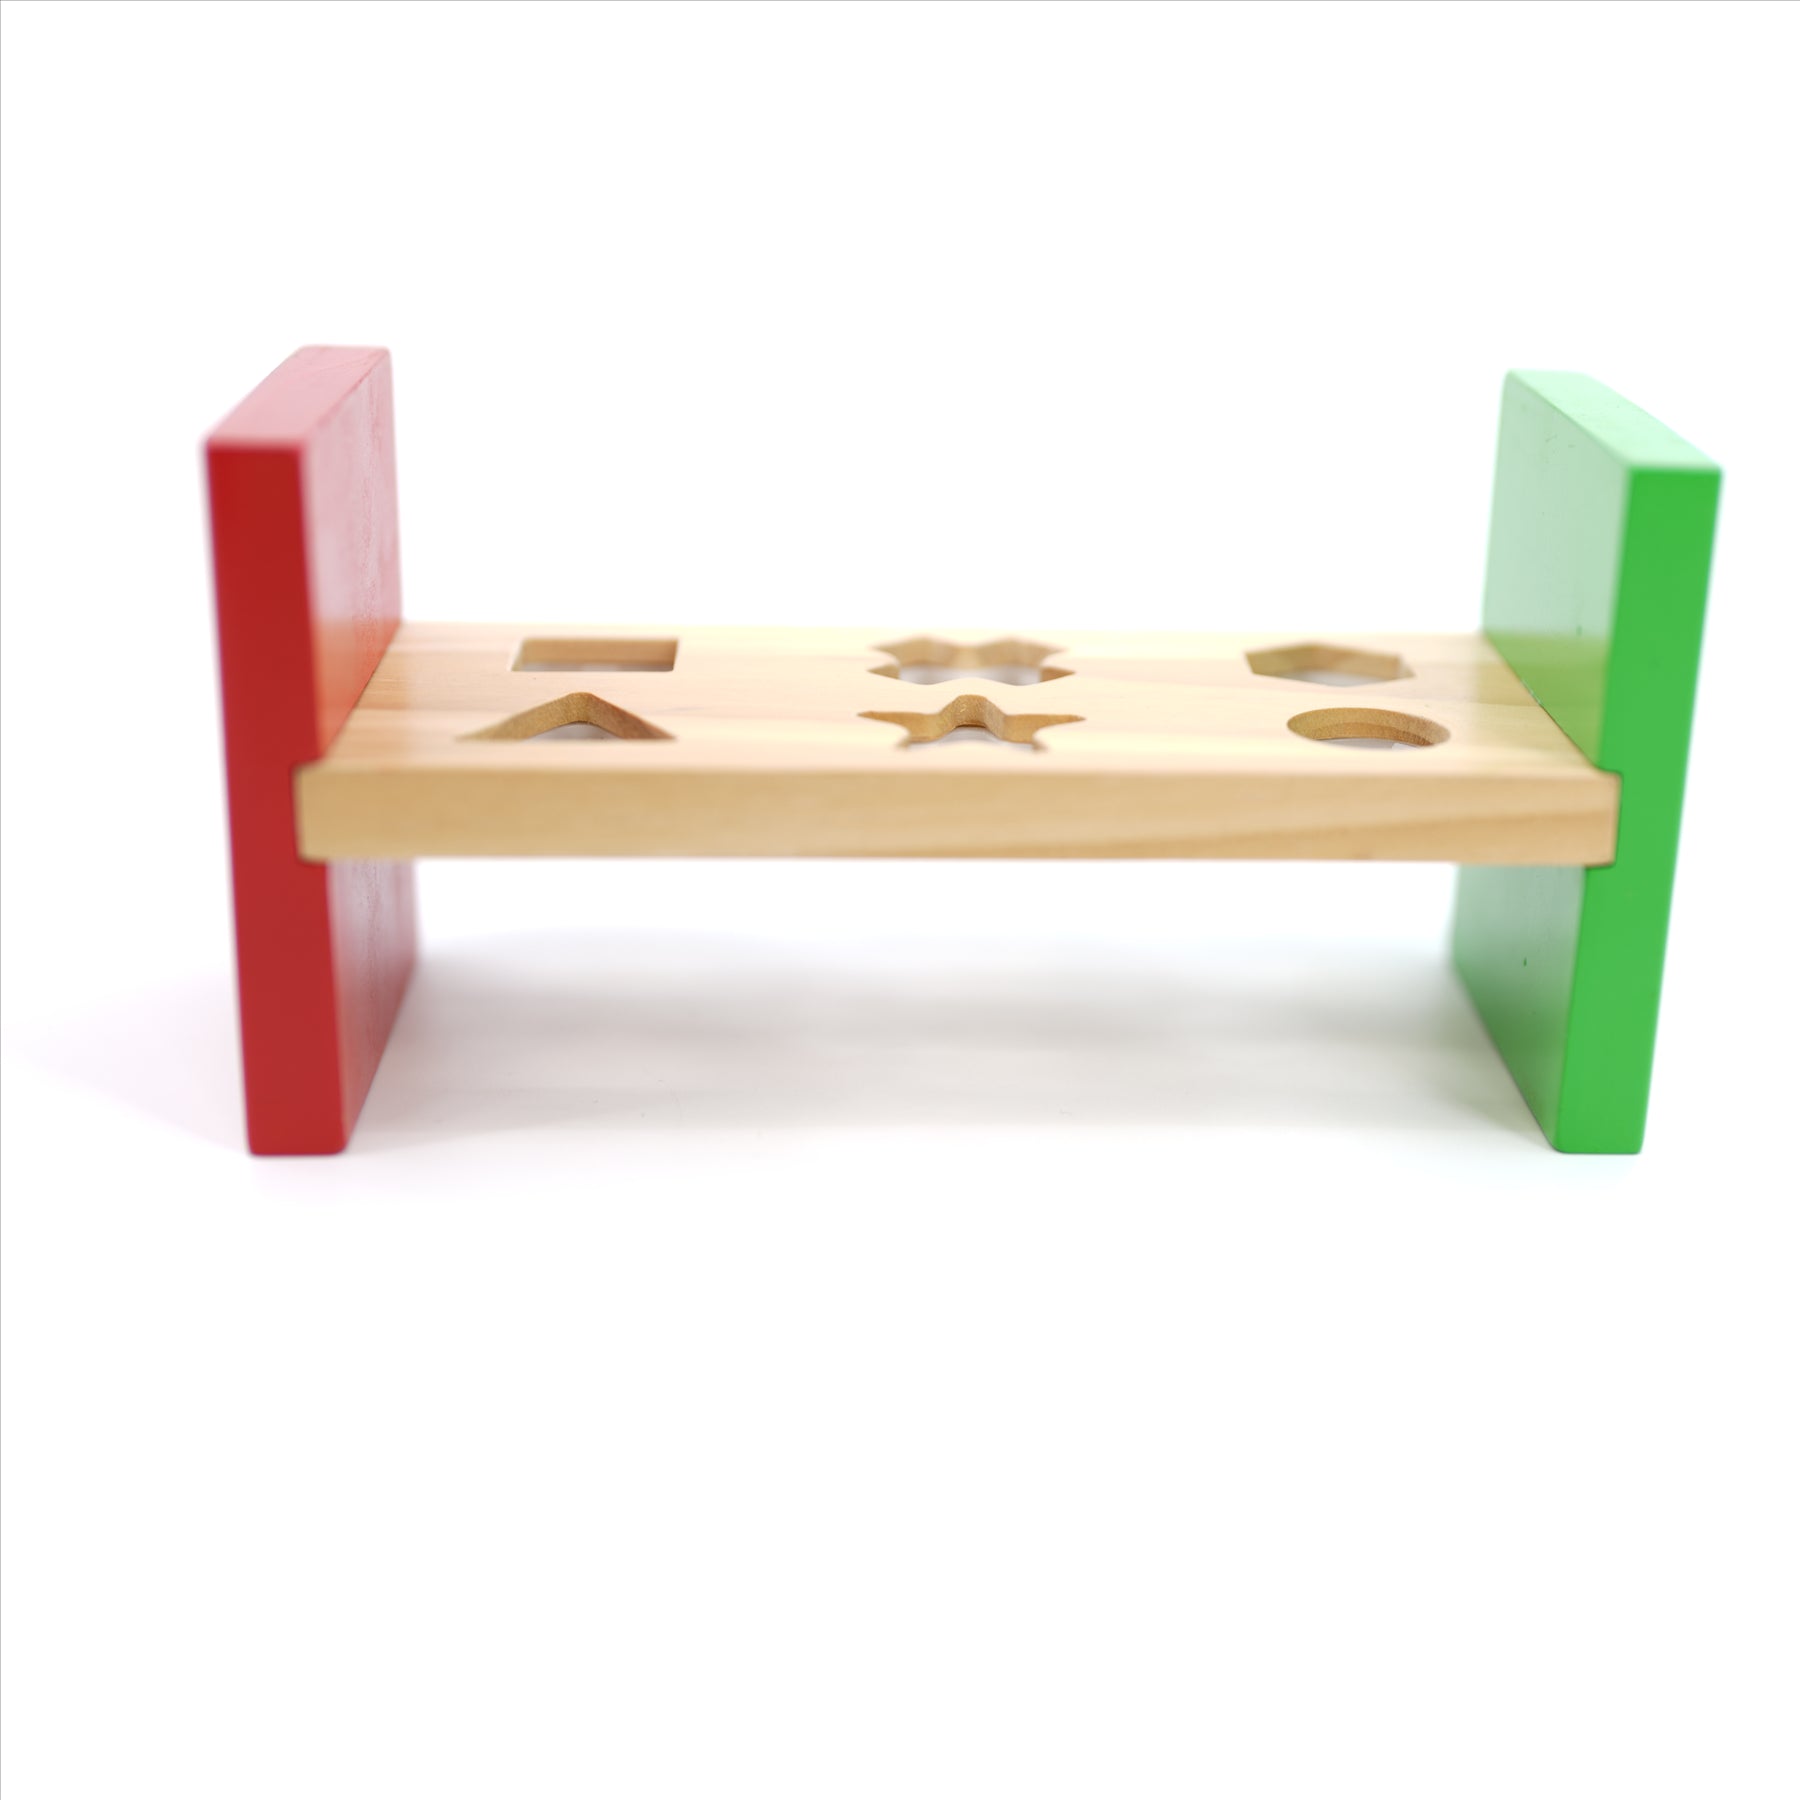 Hammer Pounding Bench Toy by The Magic Toy Shop - The Magic Toy Shop